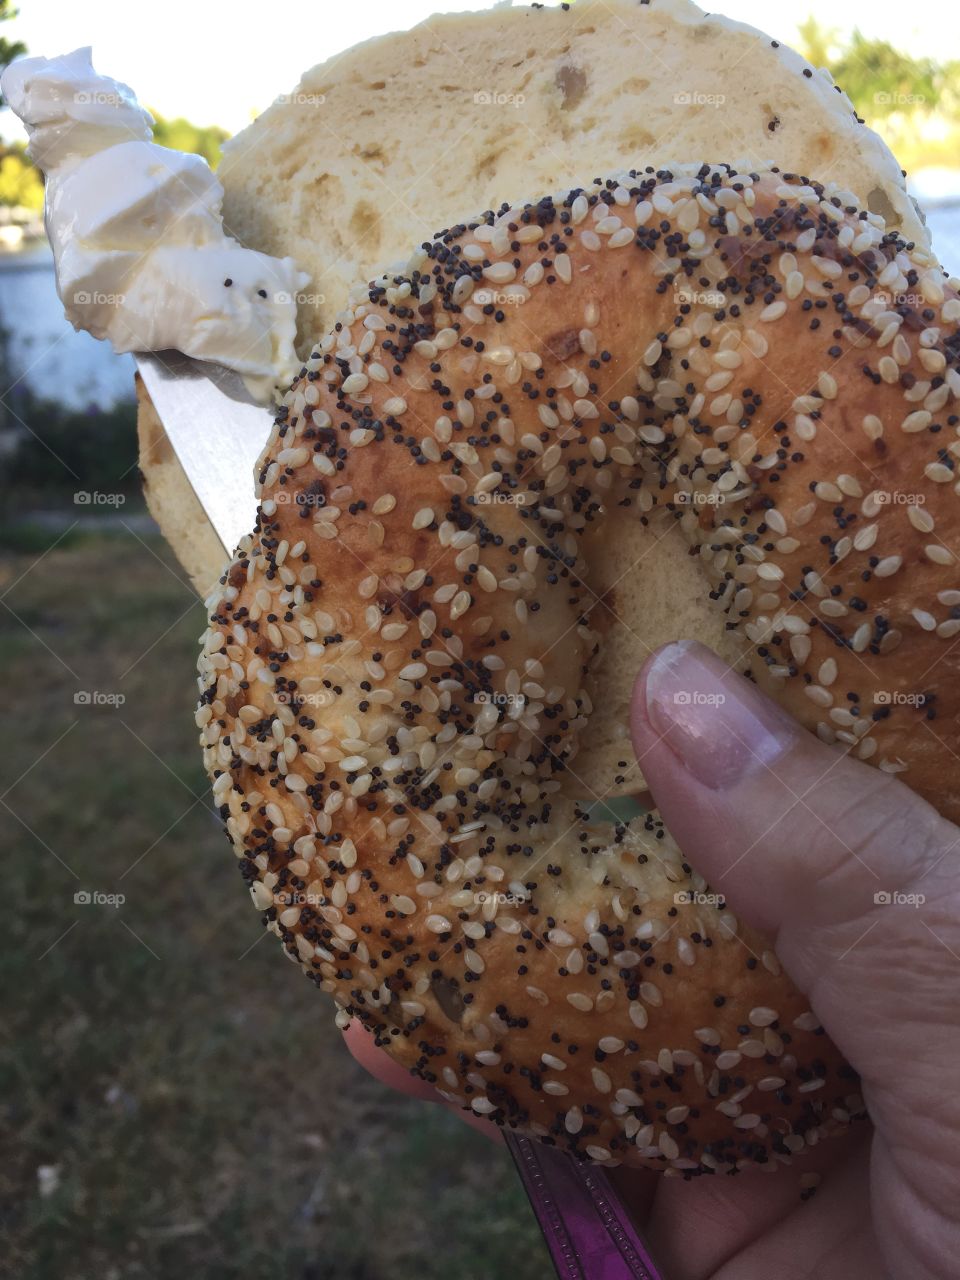 HOLDING AN EVERYTHING BAGEL